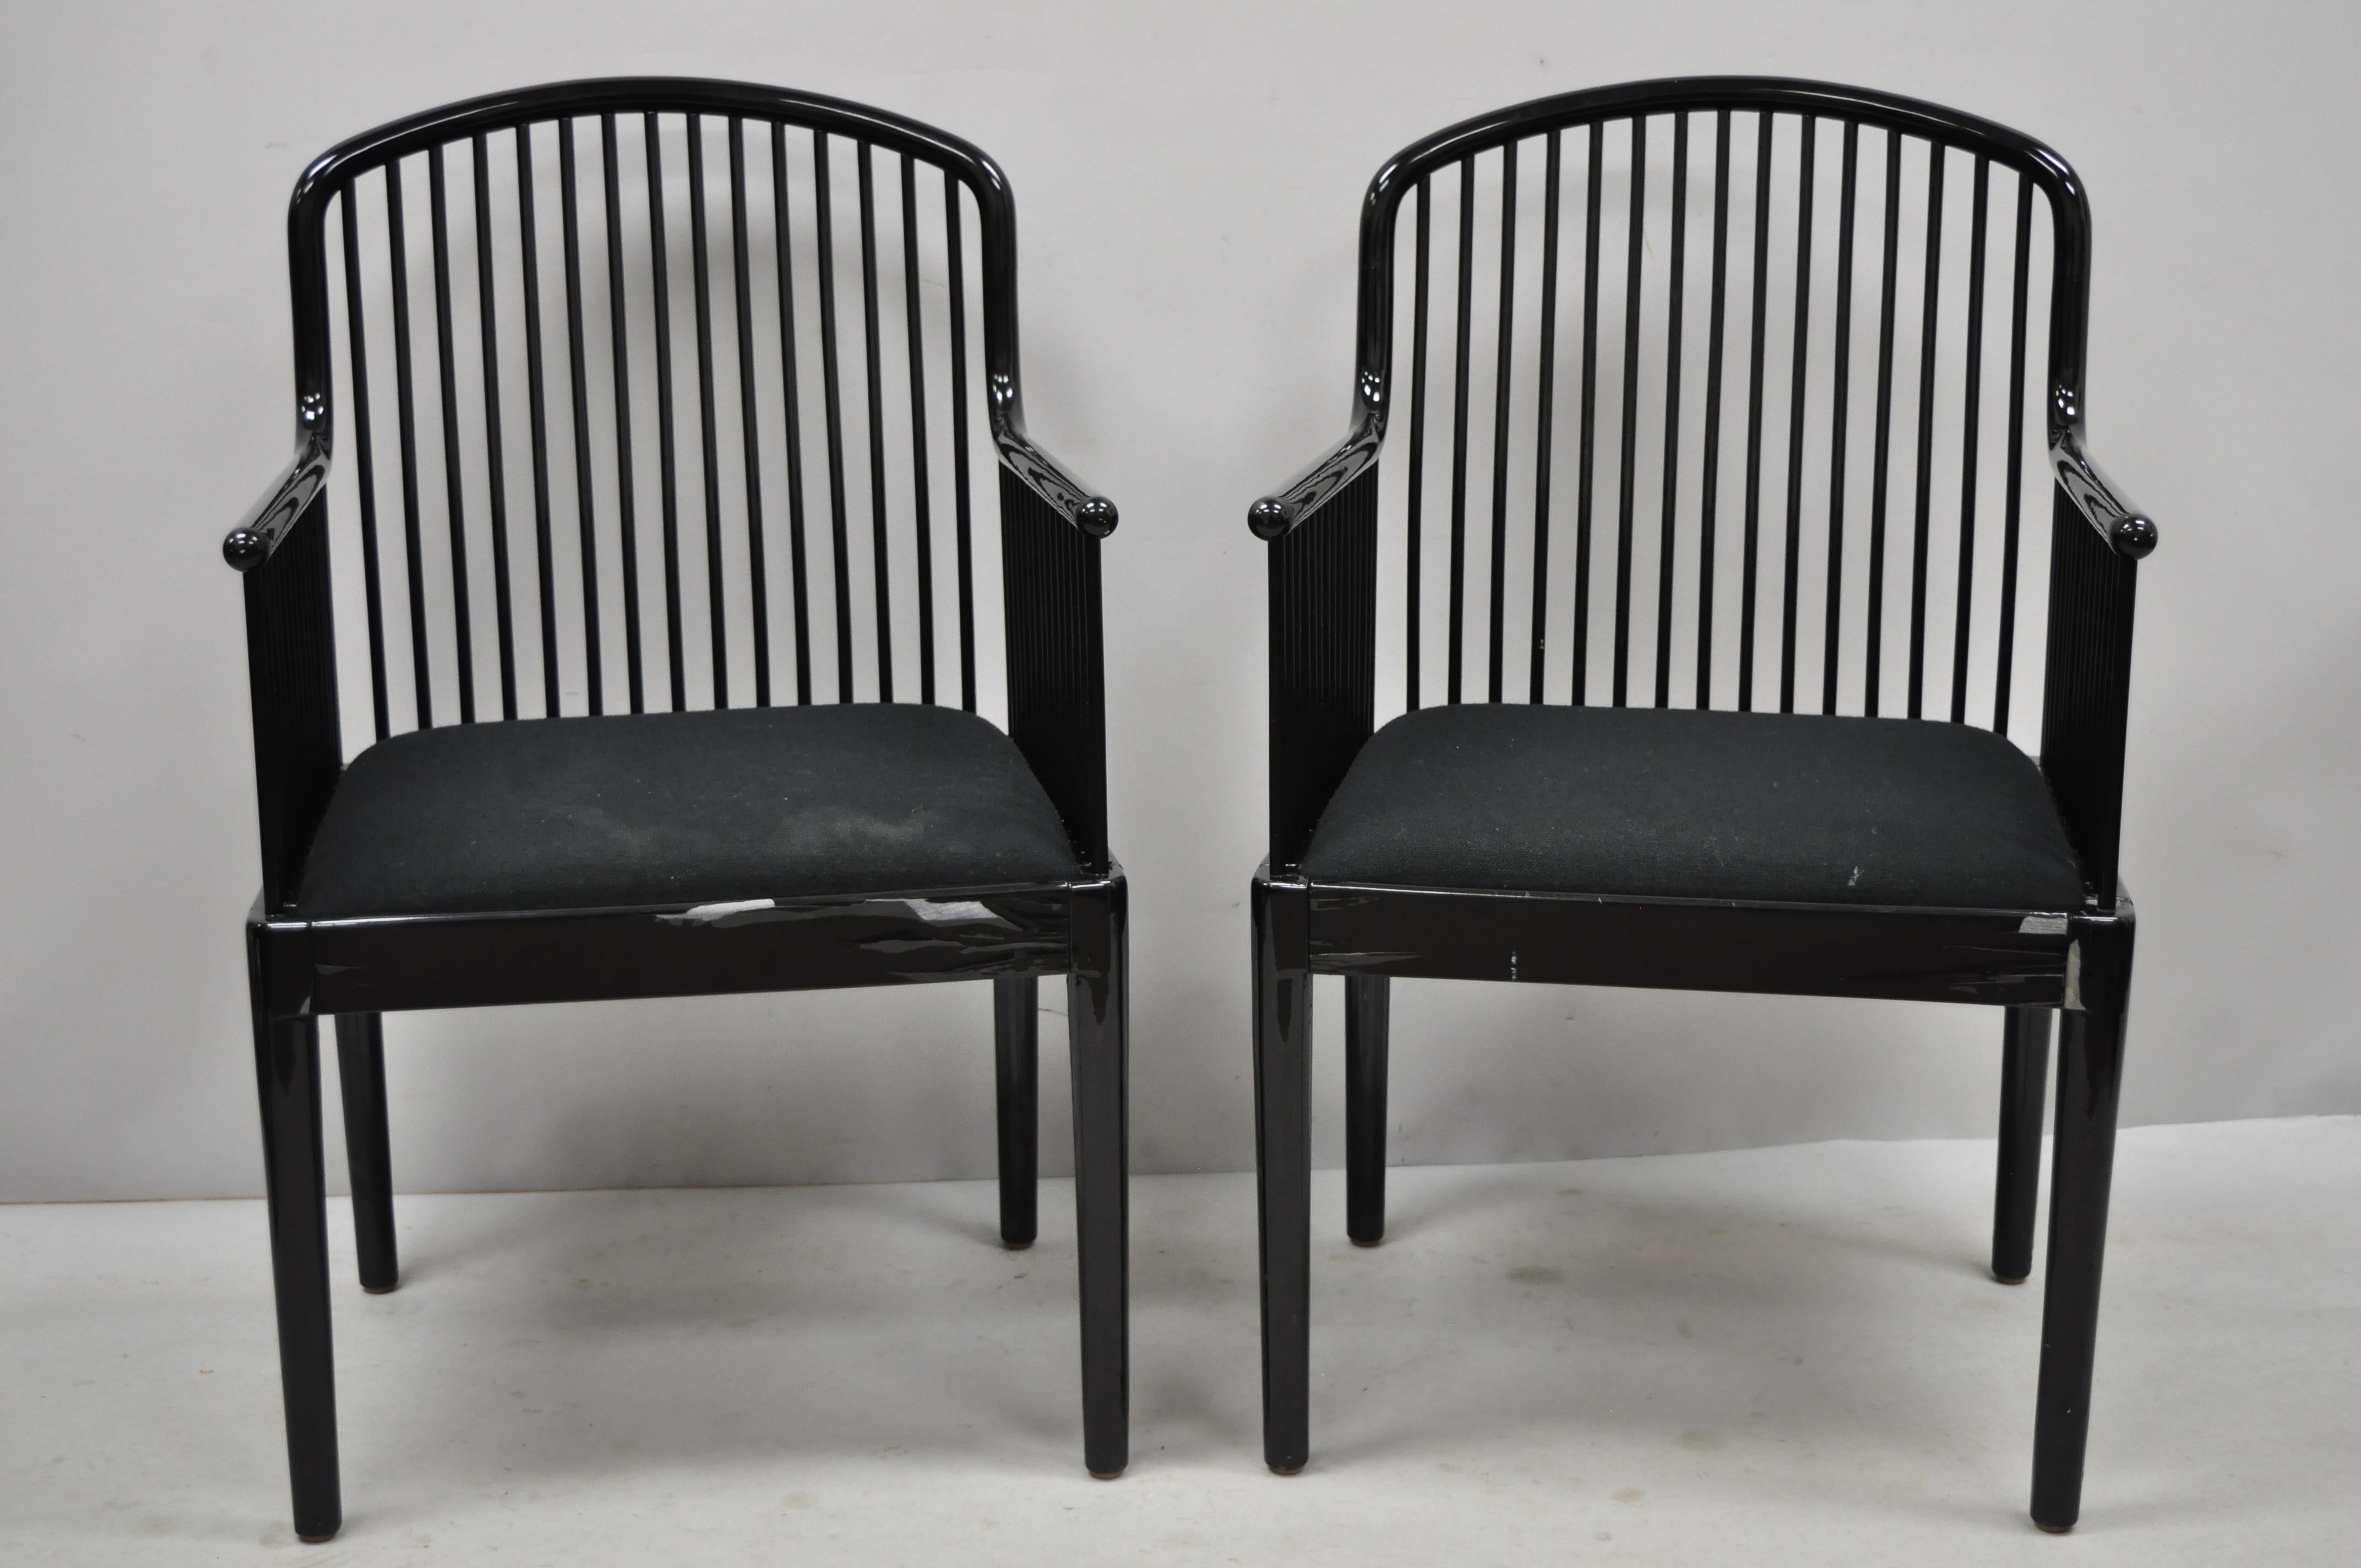 Pair of black lacquer modern Andover armchairs by Davis Allen for Stendig (C). Item includes a black lacquer finish, solid wood frame, original label, very nice vintage item, clean modernist lines, circa late 20th century. Measurements: 36.5